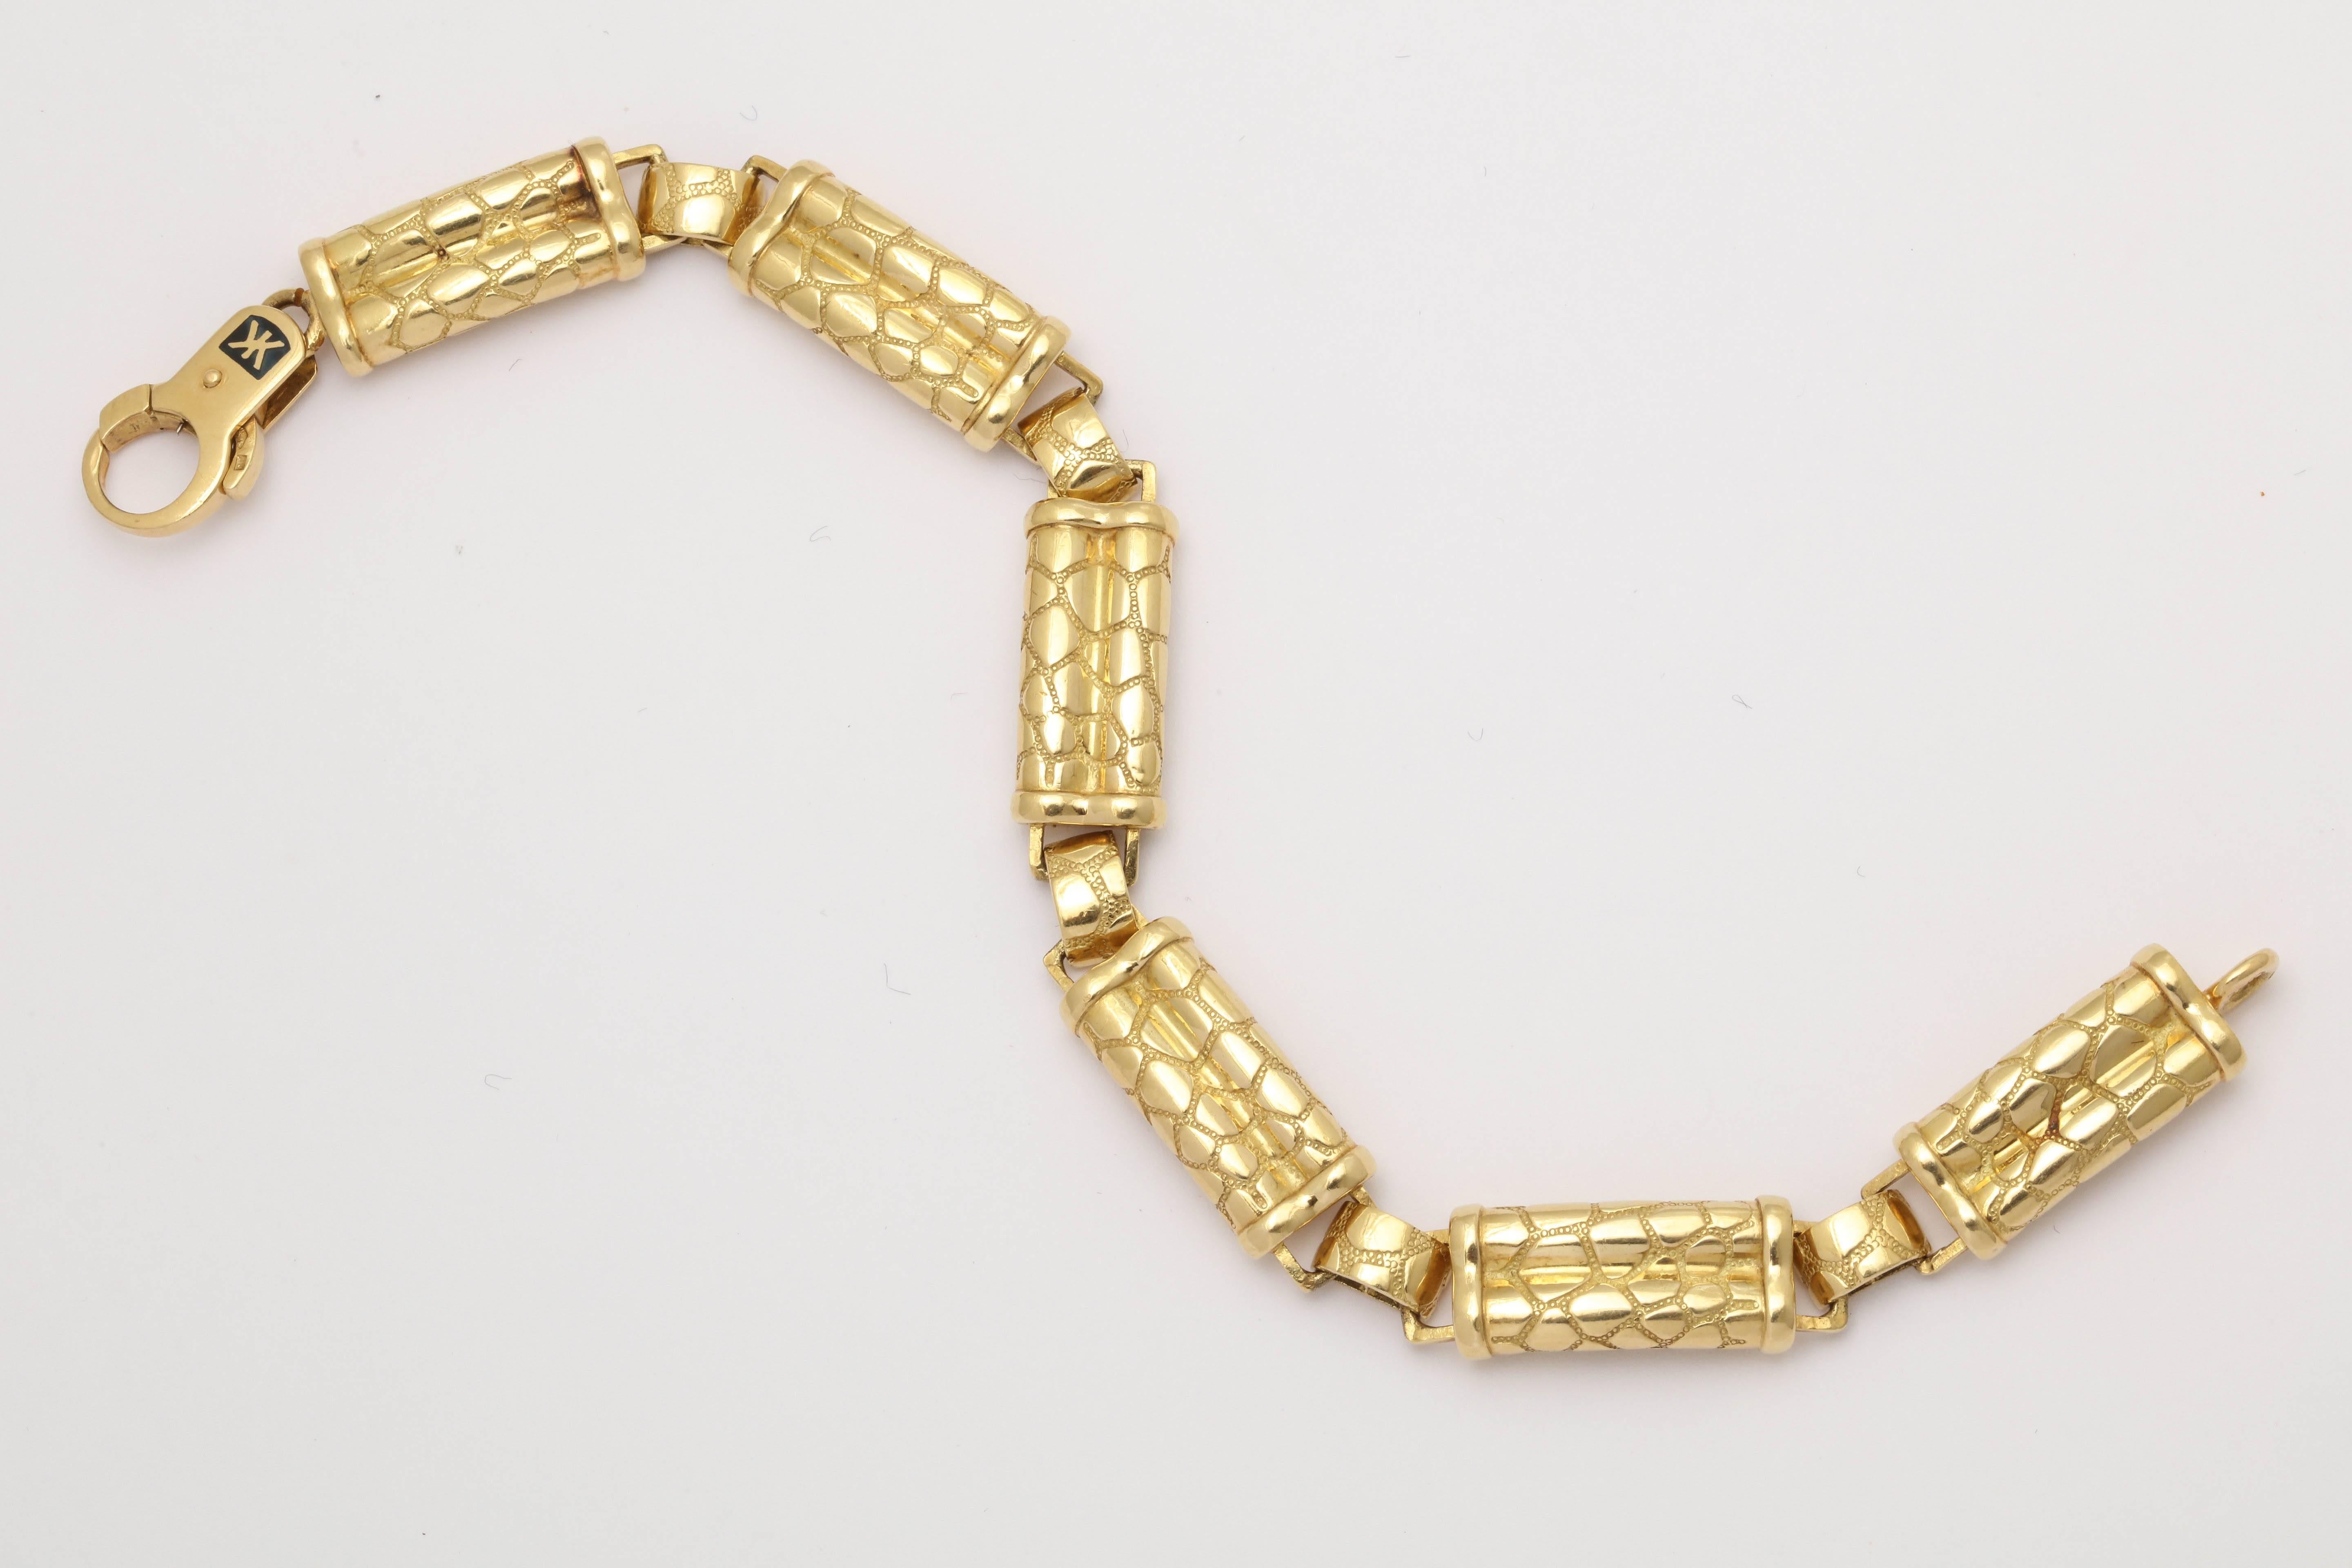 One Unisex Flexible Link Bracelet Created In A High Intense Bright Color 18kt Yellow Gold Reptile Design.Each Link Is Created In A Double Barrel Motif Connected By An Oblong Smaller Three Dimensional Link. All Links Designed In A Beautiful reptile